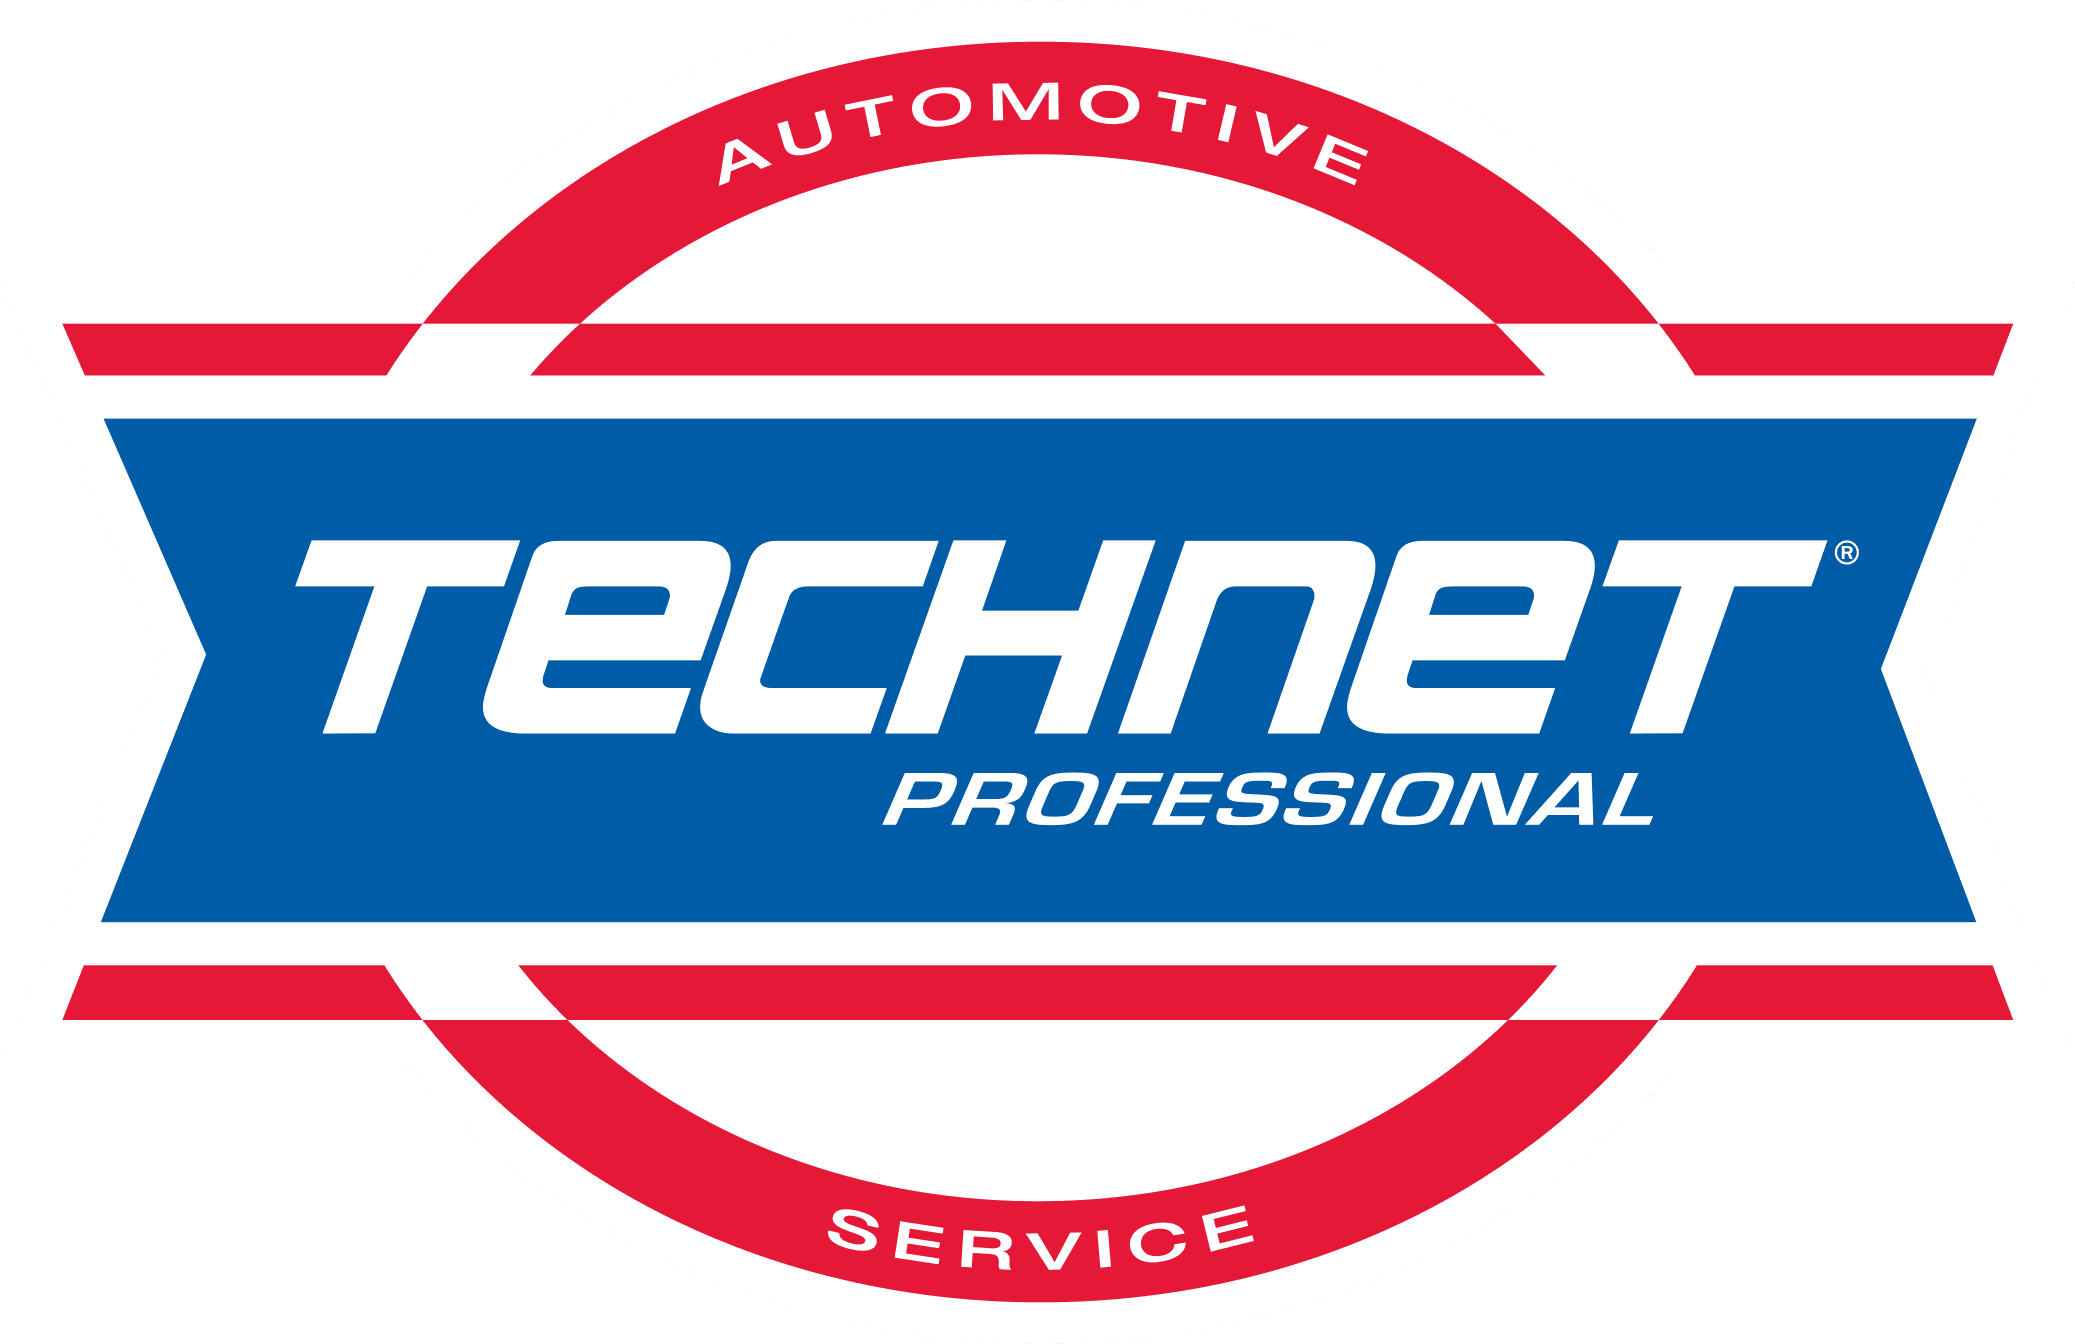 Coyote Motors offers TechNet, one of the many reasons we are one of the best auto shops Boulder